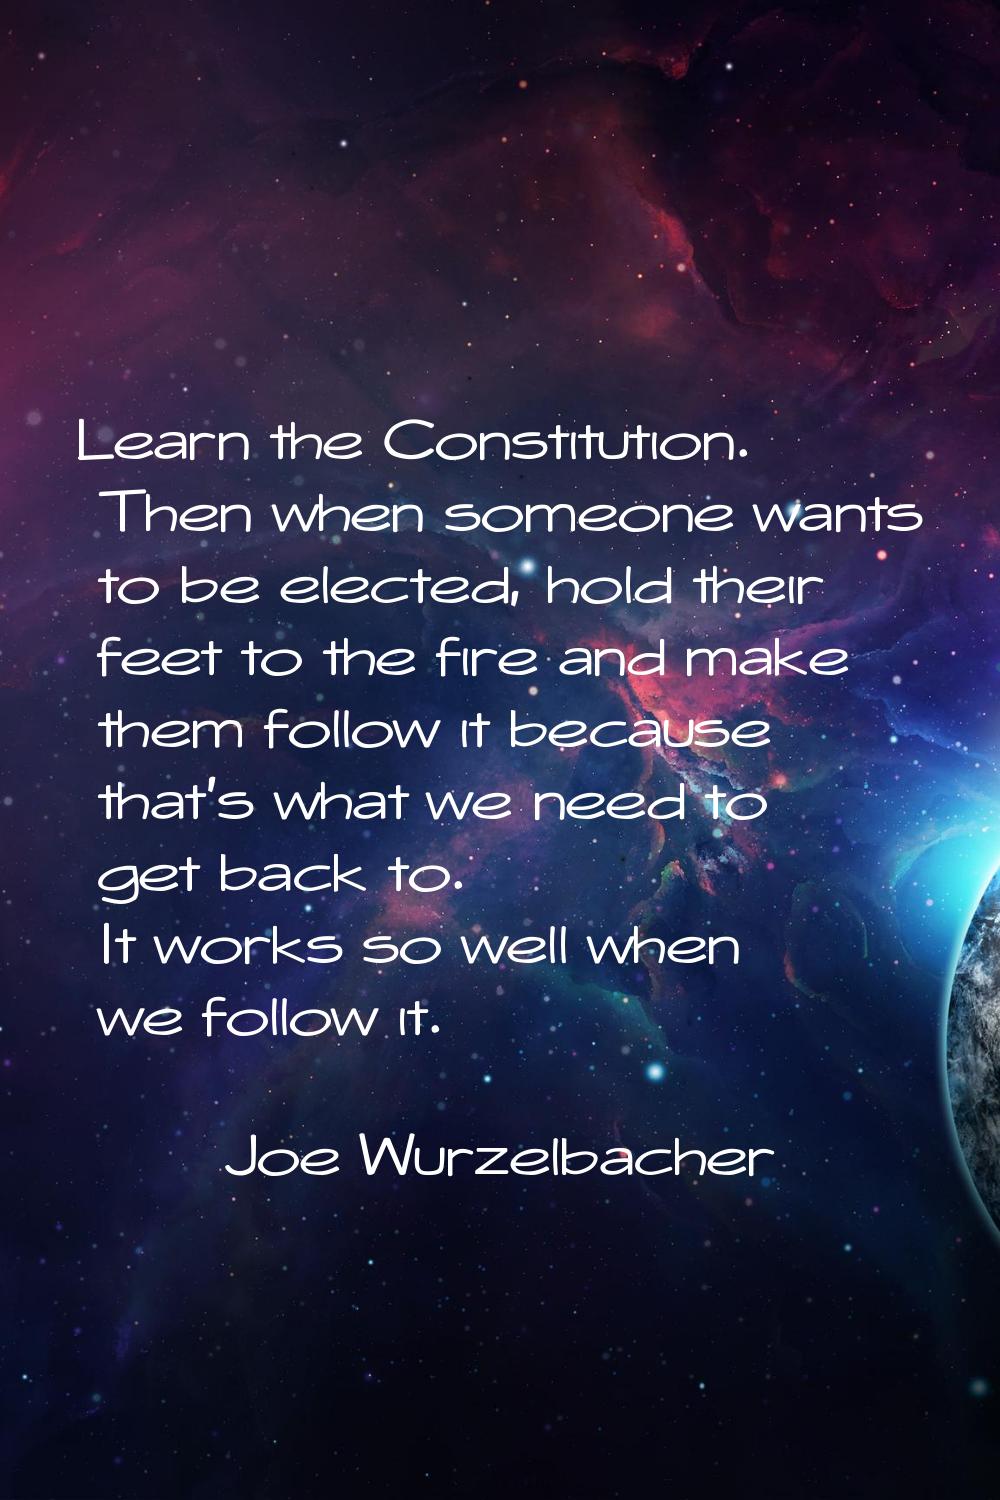 Learn the Constitution. Then when someone wants to be elected, hold their feet to the fire and make